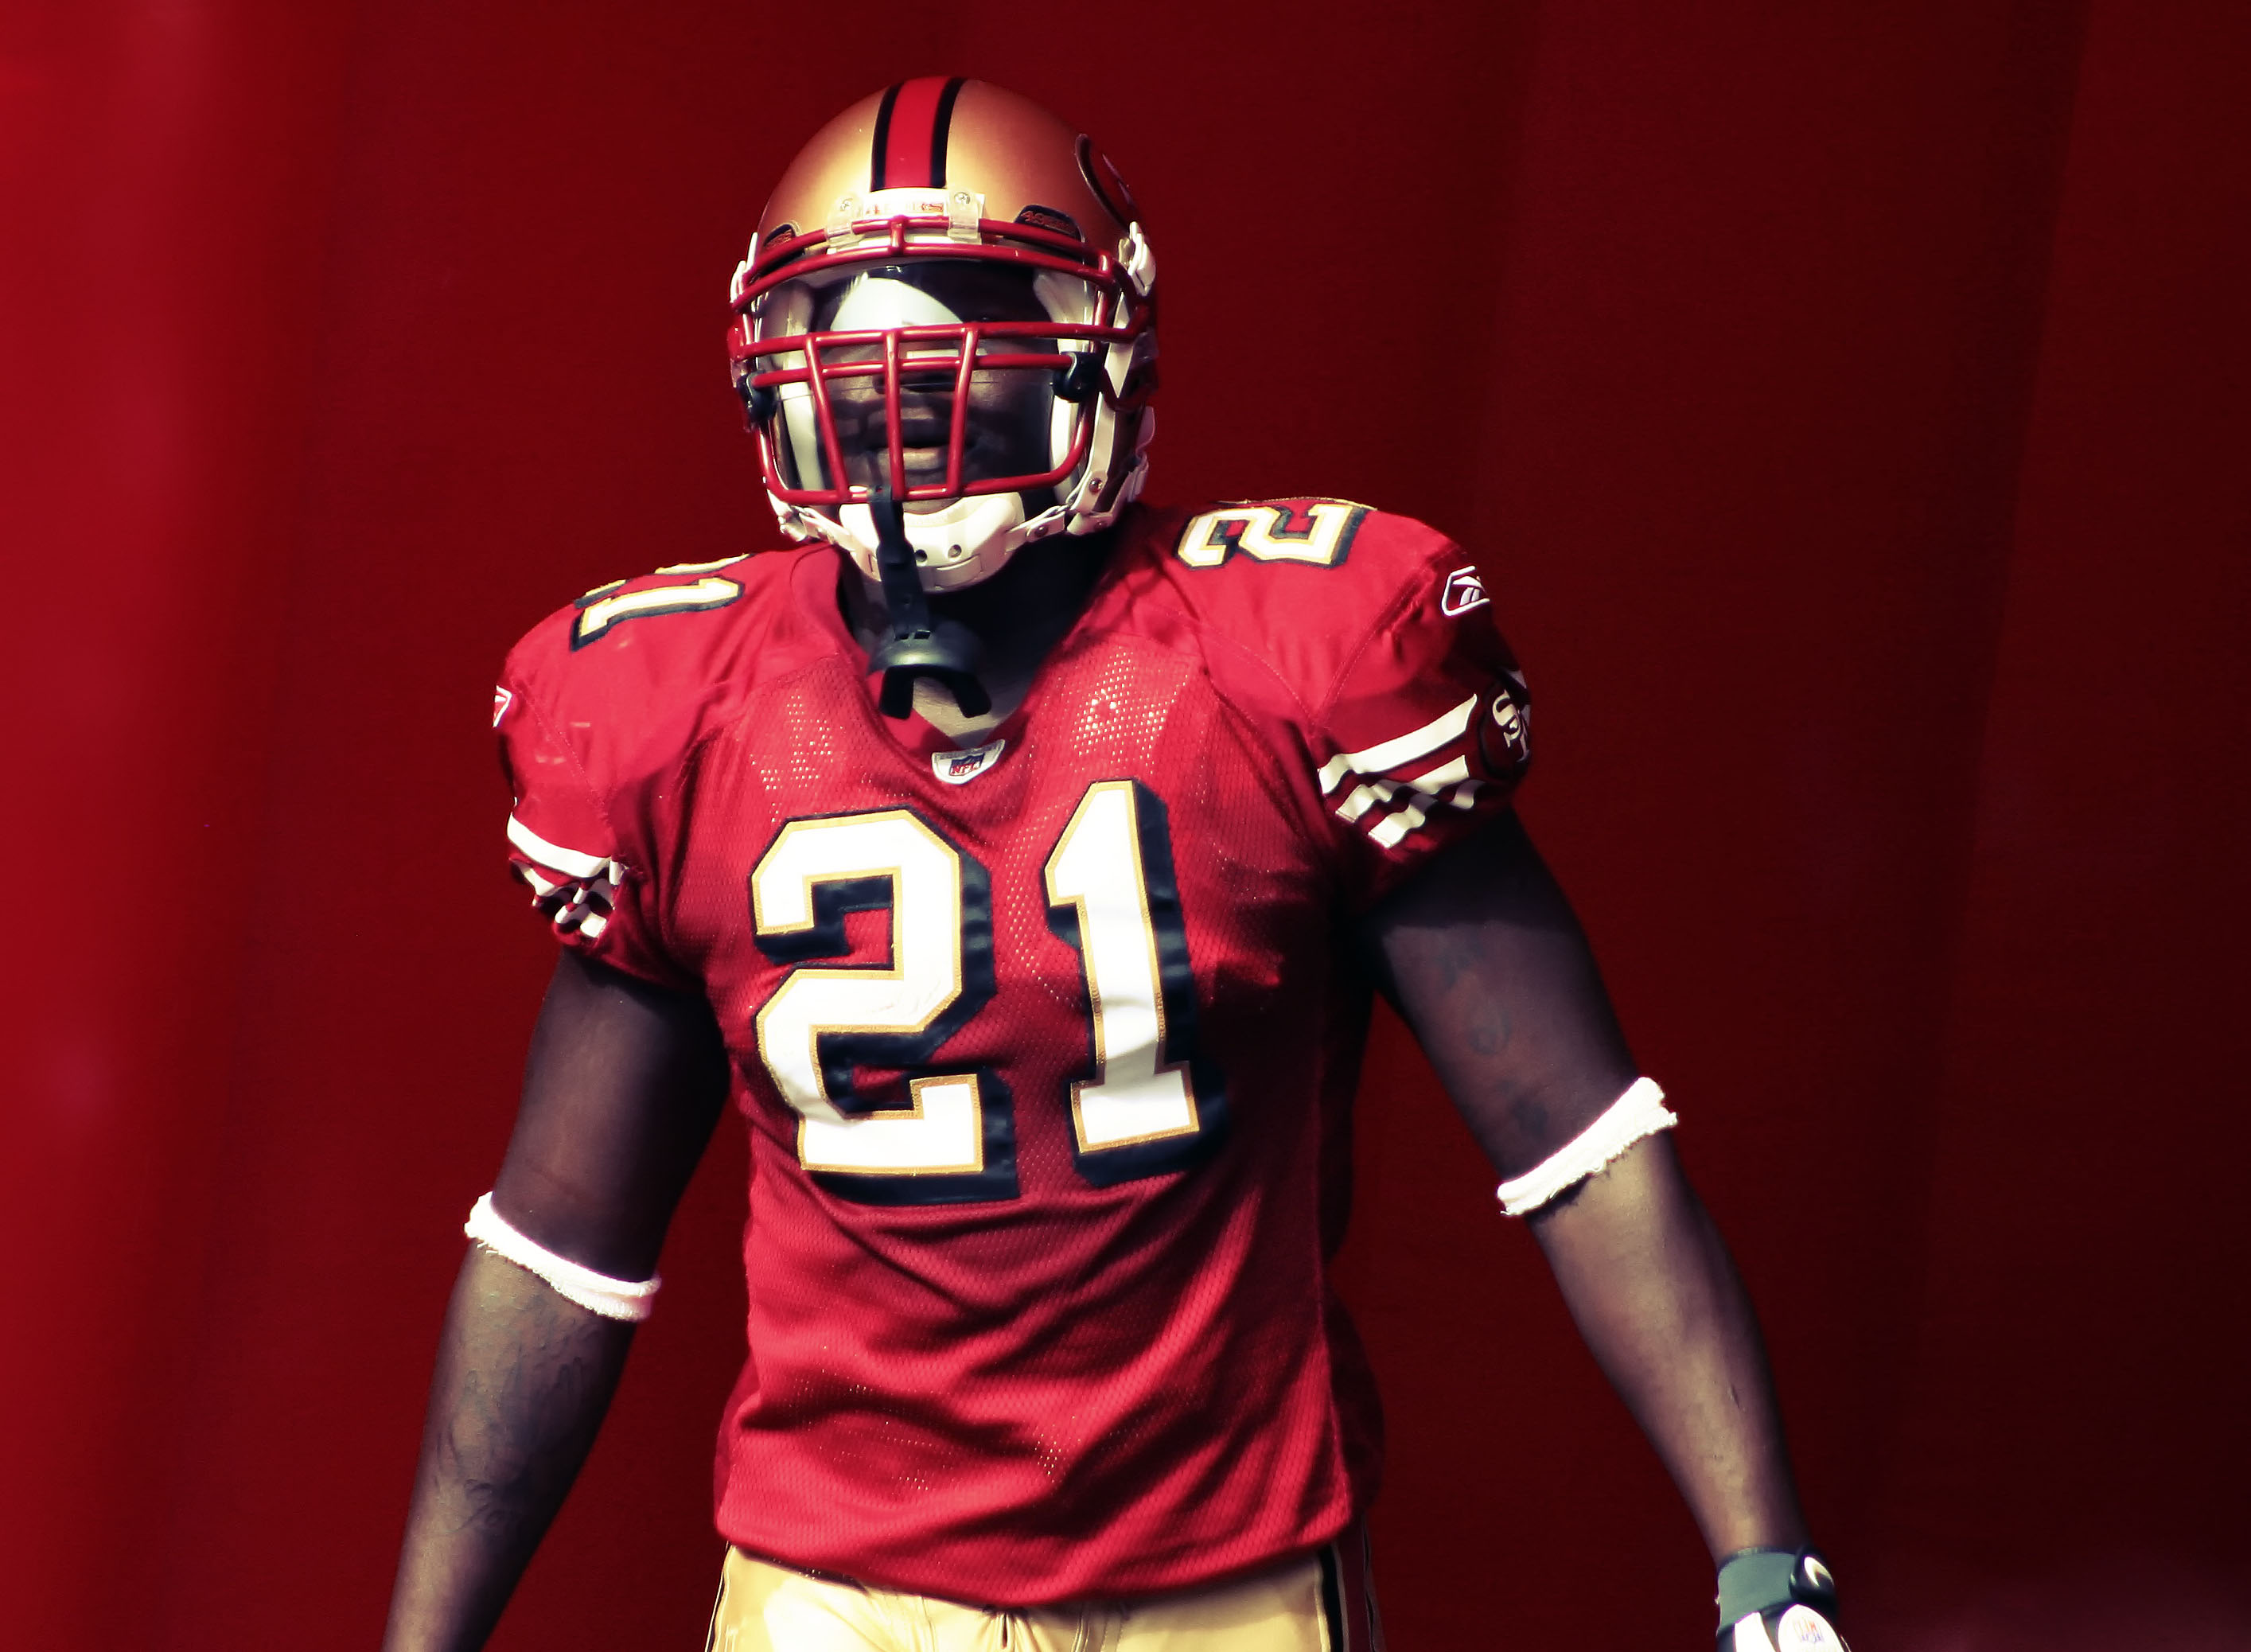 49ers hd wallpapers